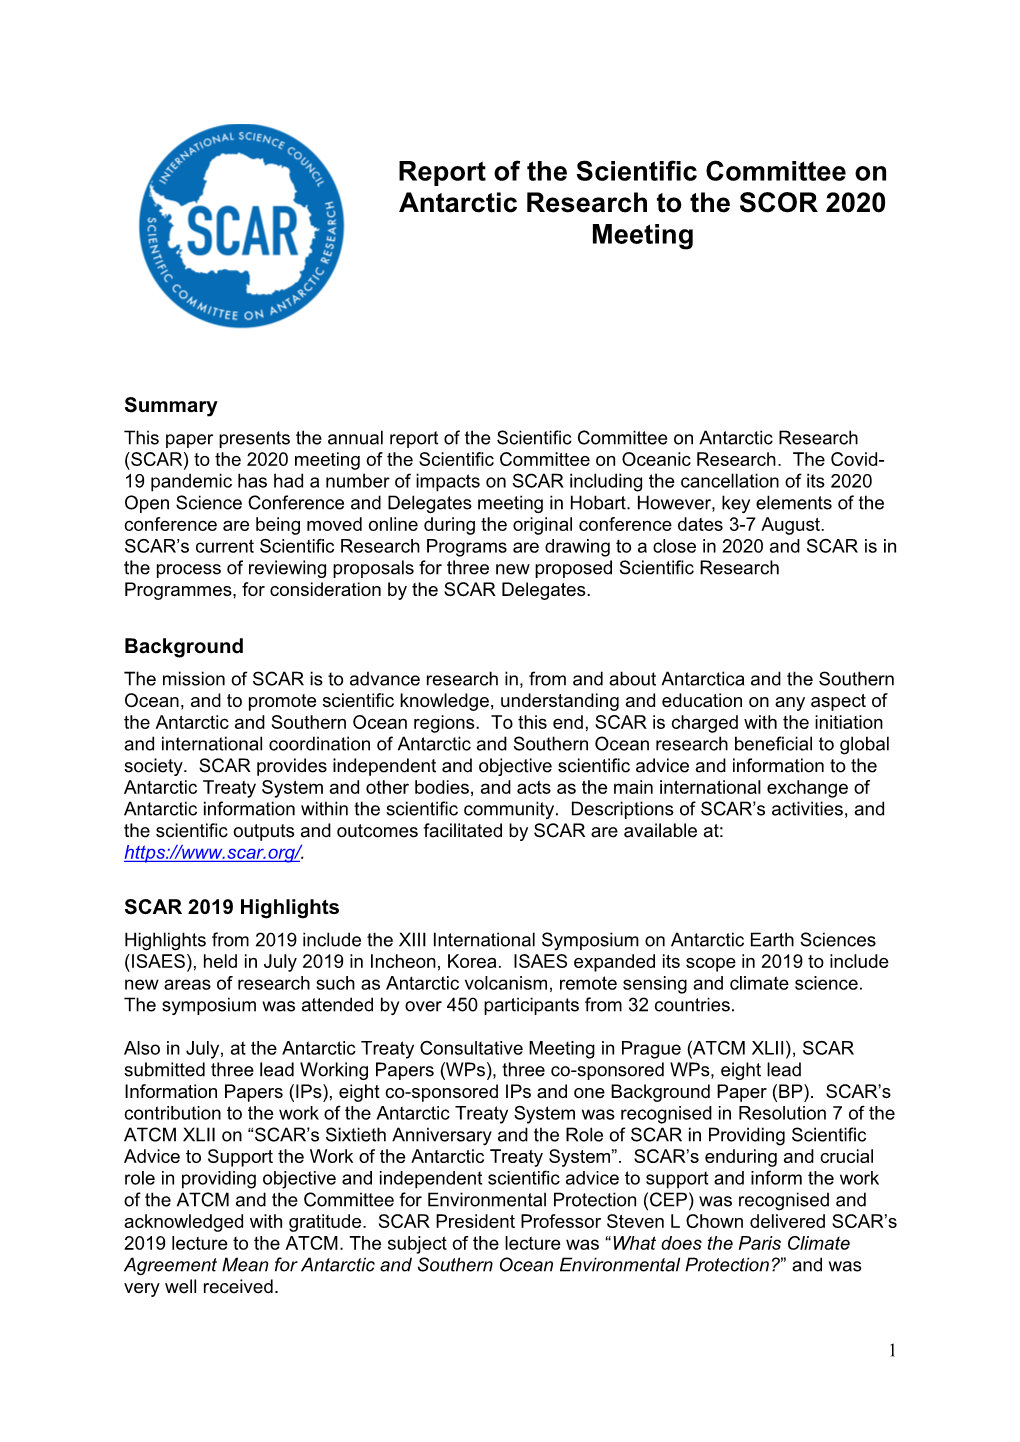 Report of the Scientific Committee on Antarctic Research to the SCOR 2020 Meeting